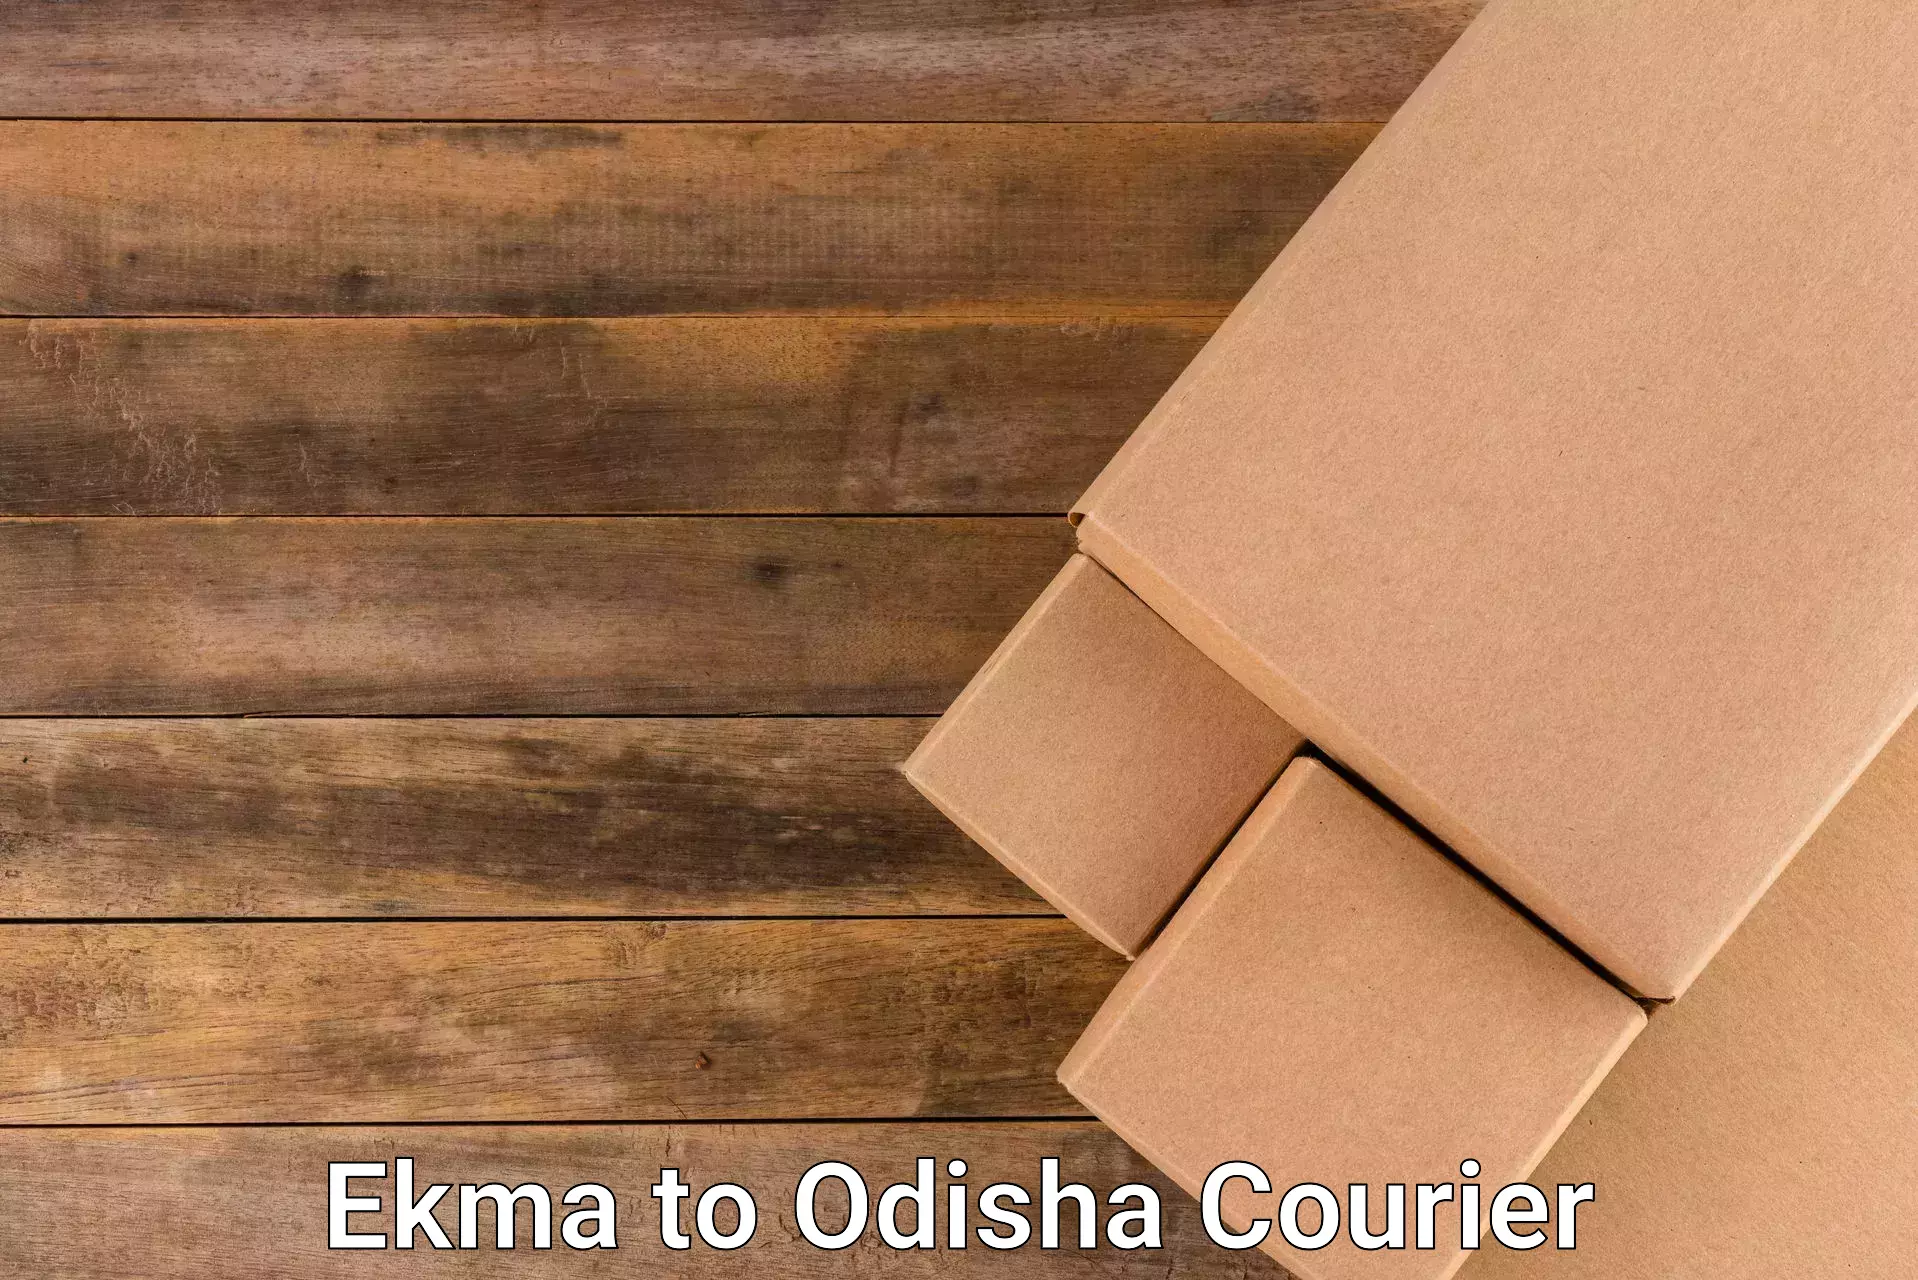 State-of-the-art courier technology Ekma to Jharsuguda